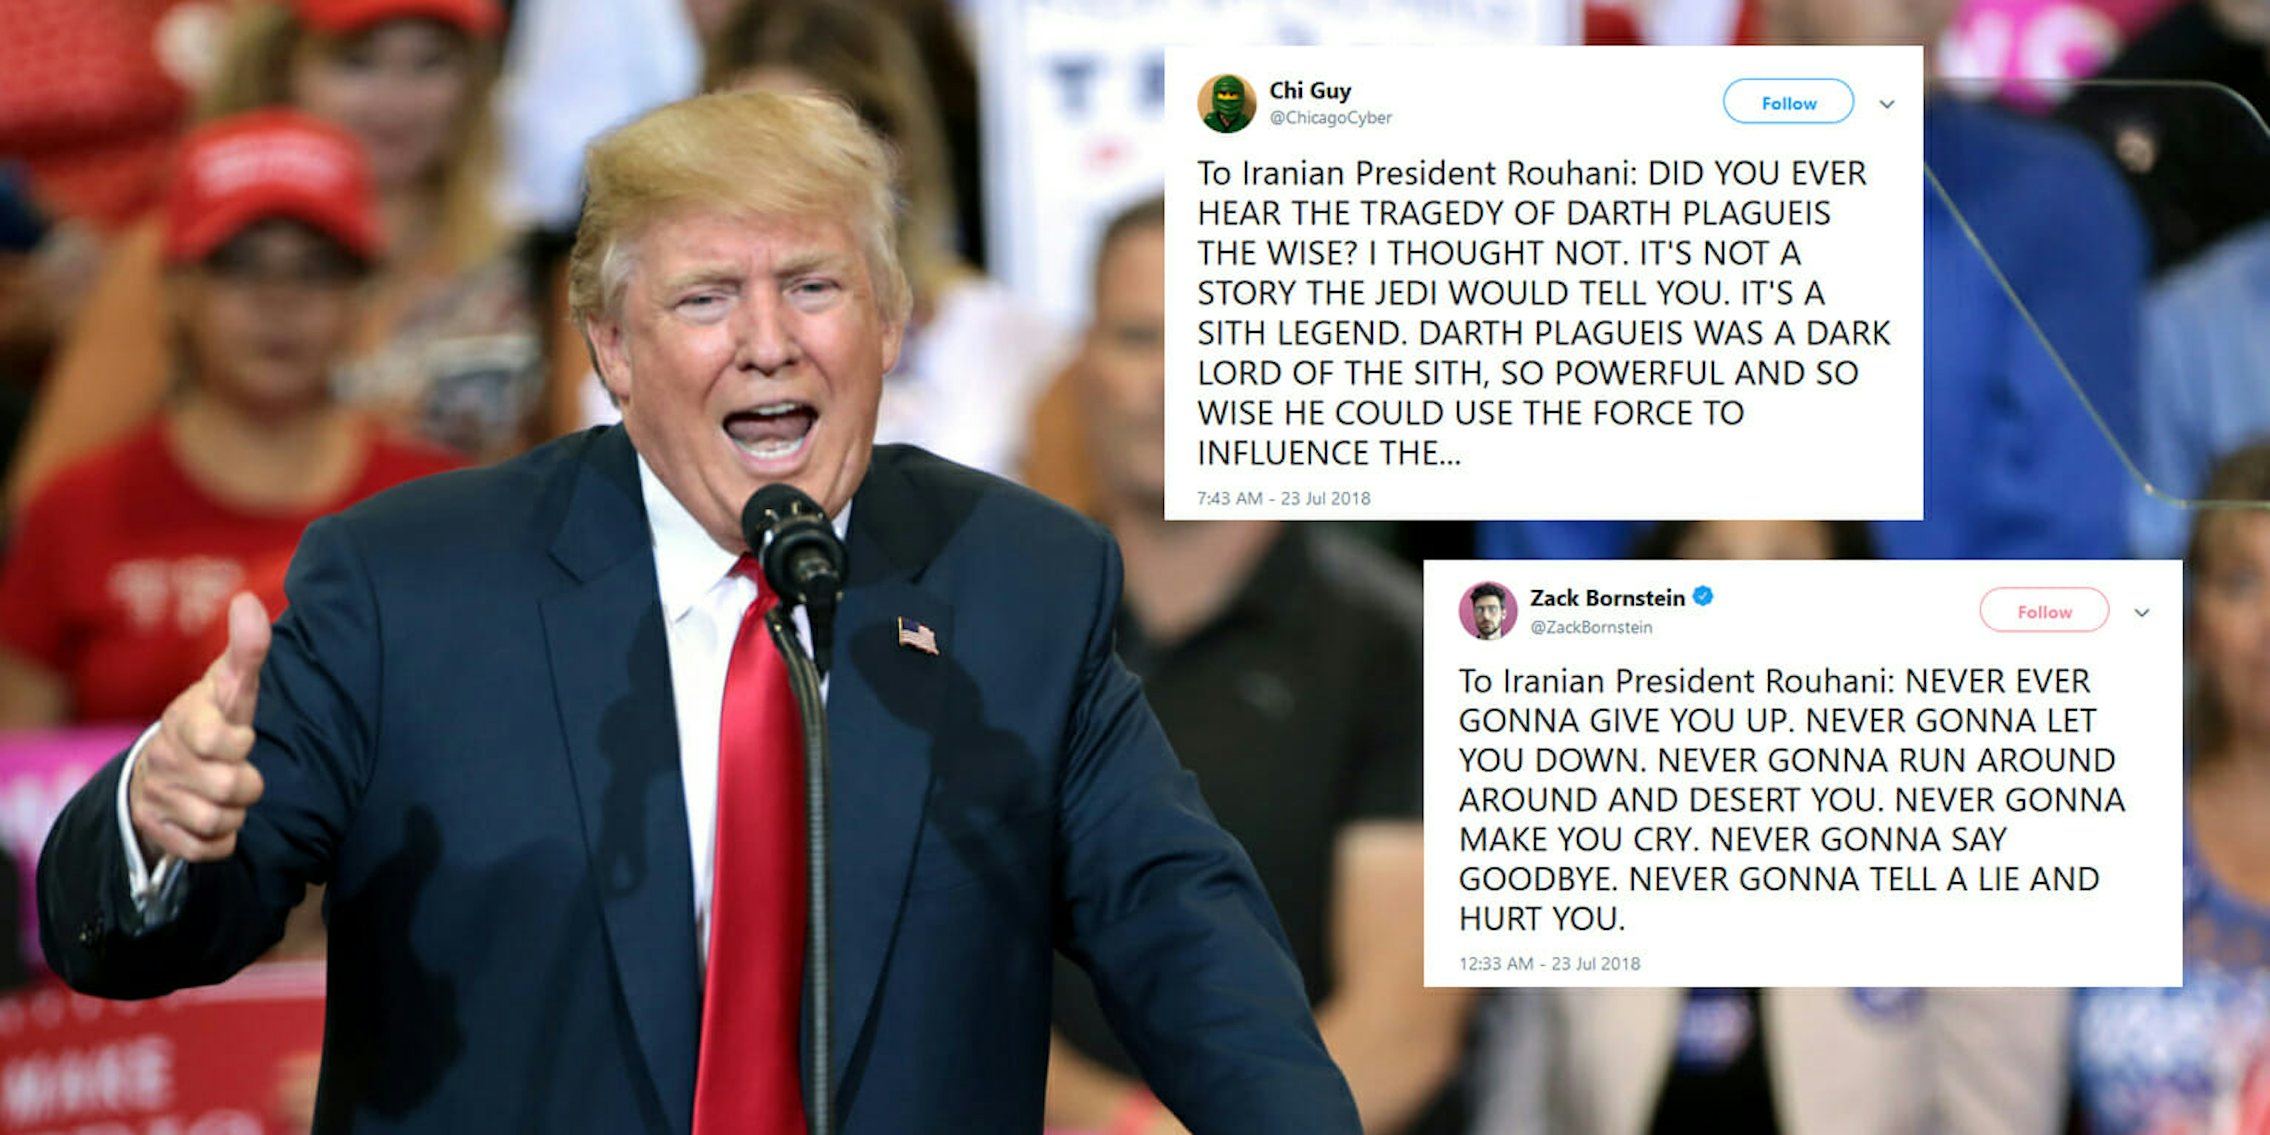 President Donald Trump made an all-caps tweet threat to Iran on Sunday. It was quickly turned into a meme–with people on Twitter mocking it mercilessly